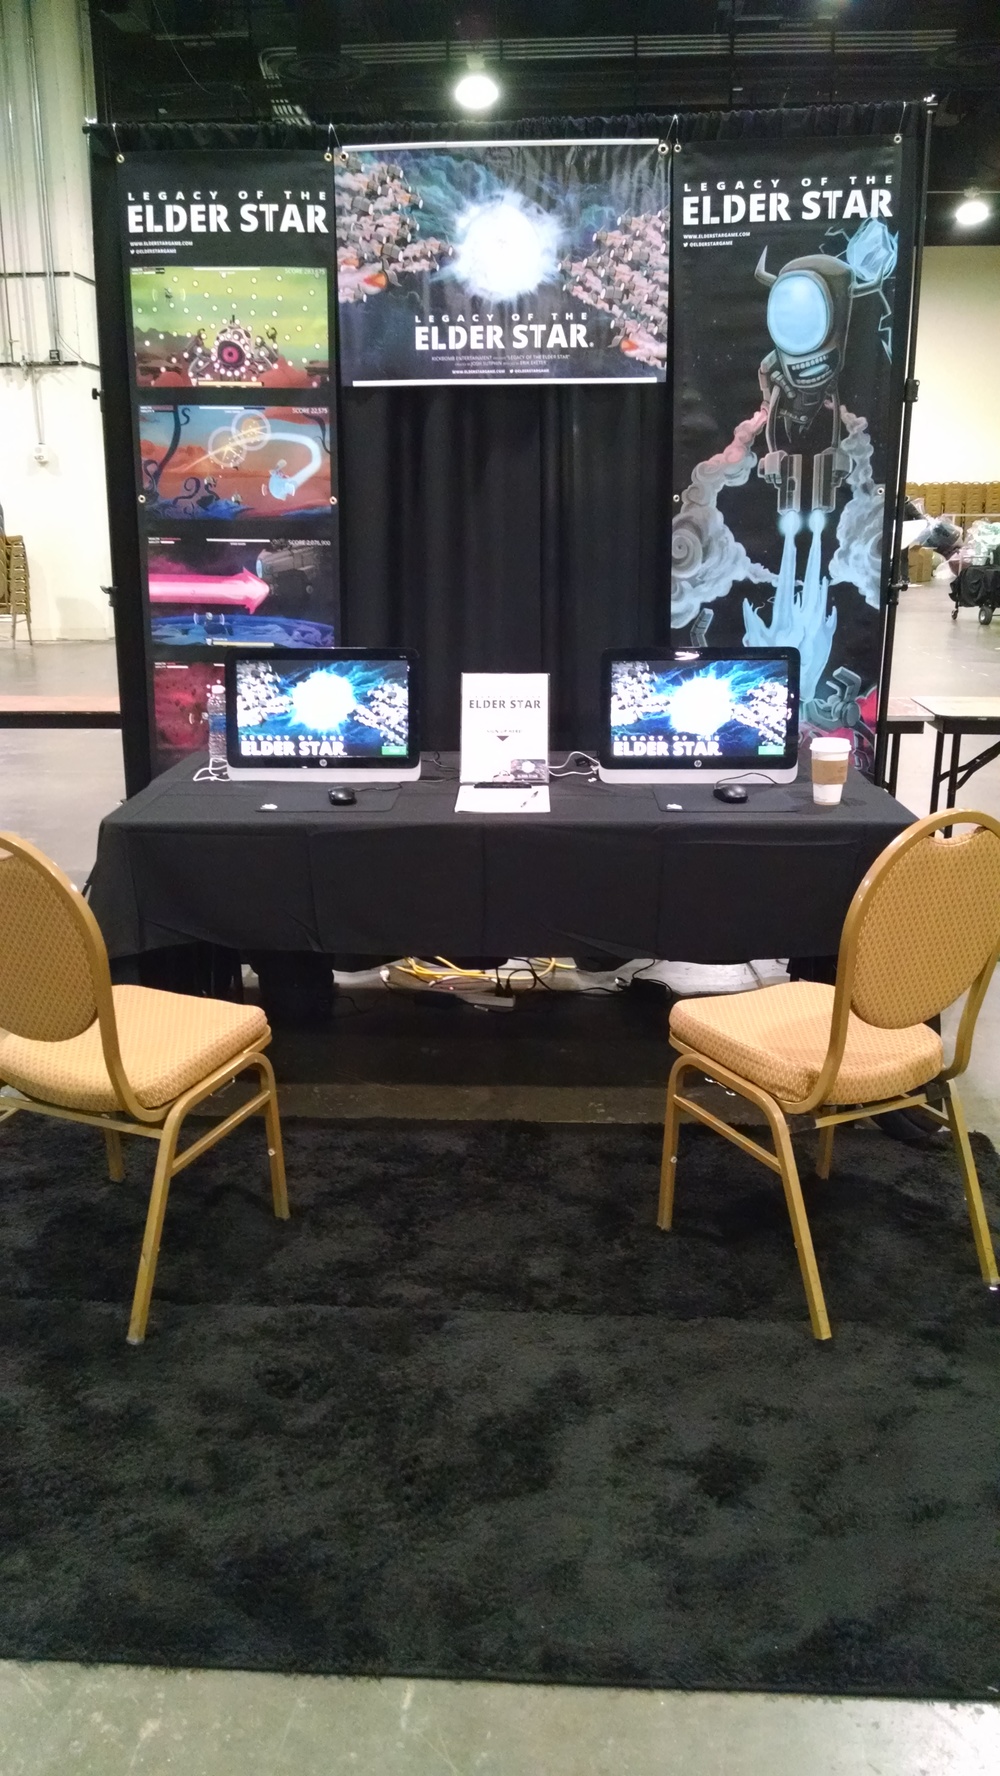 Legacy of the Elder Star at MagFest 2016